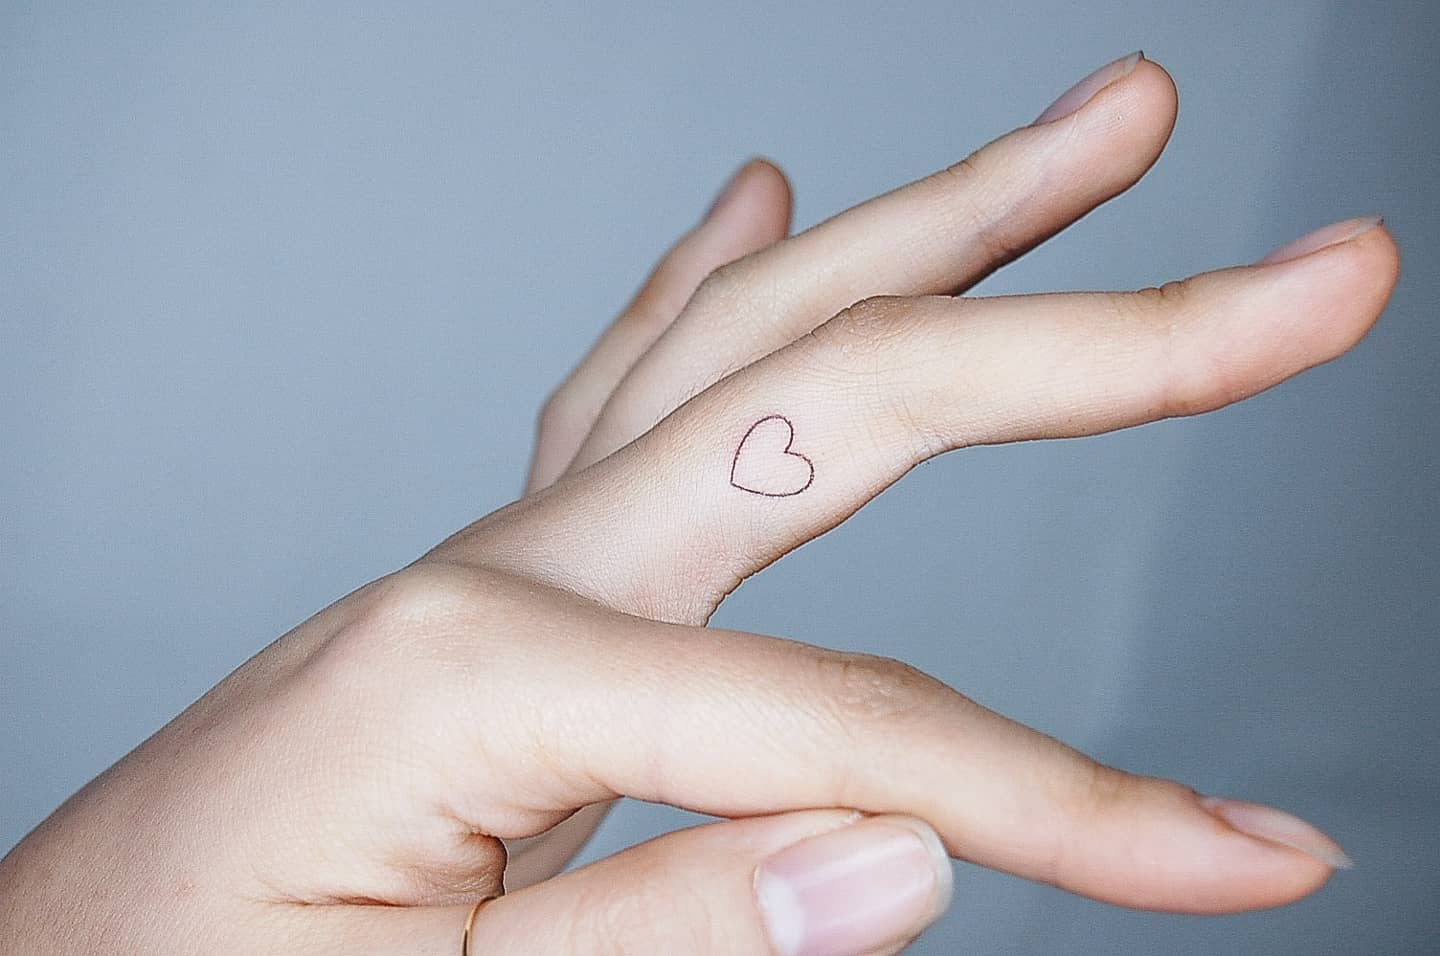 Get Inspiring Finger Tattoo Ideas - Designs & Meanings for Everyone